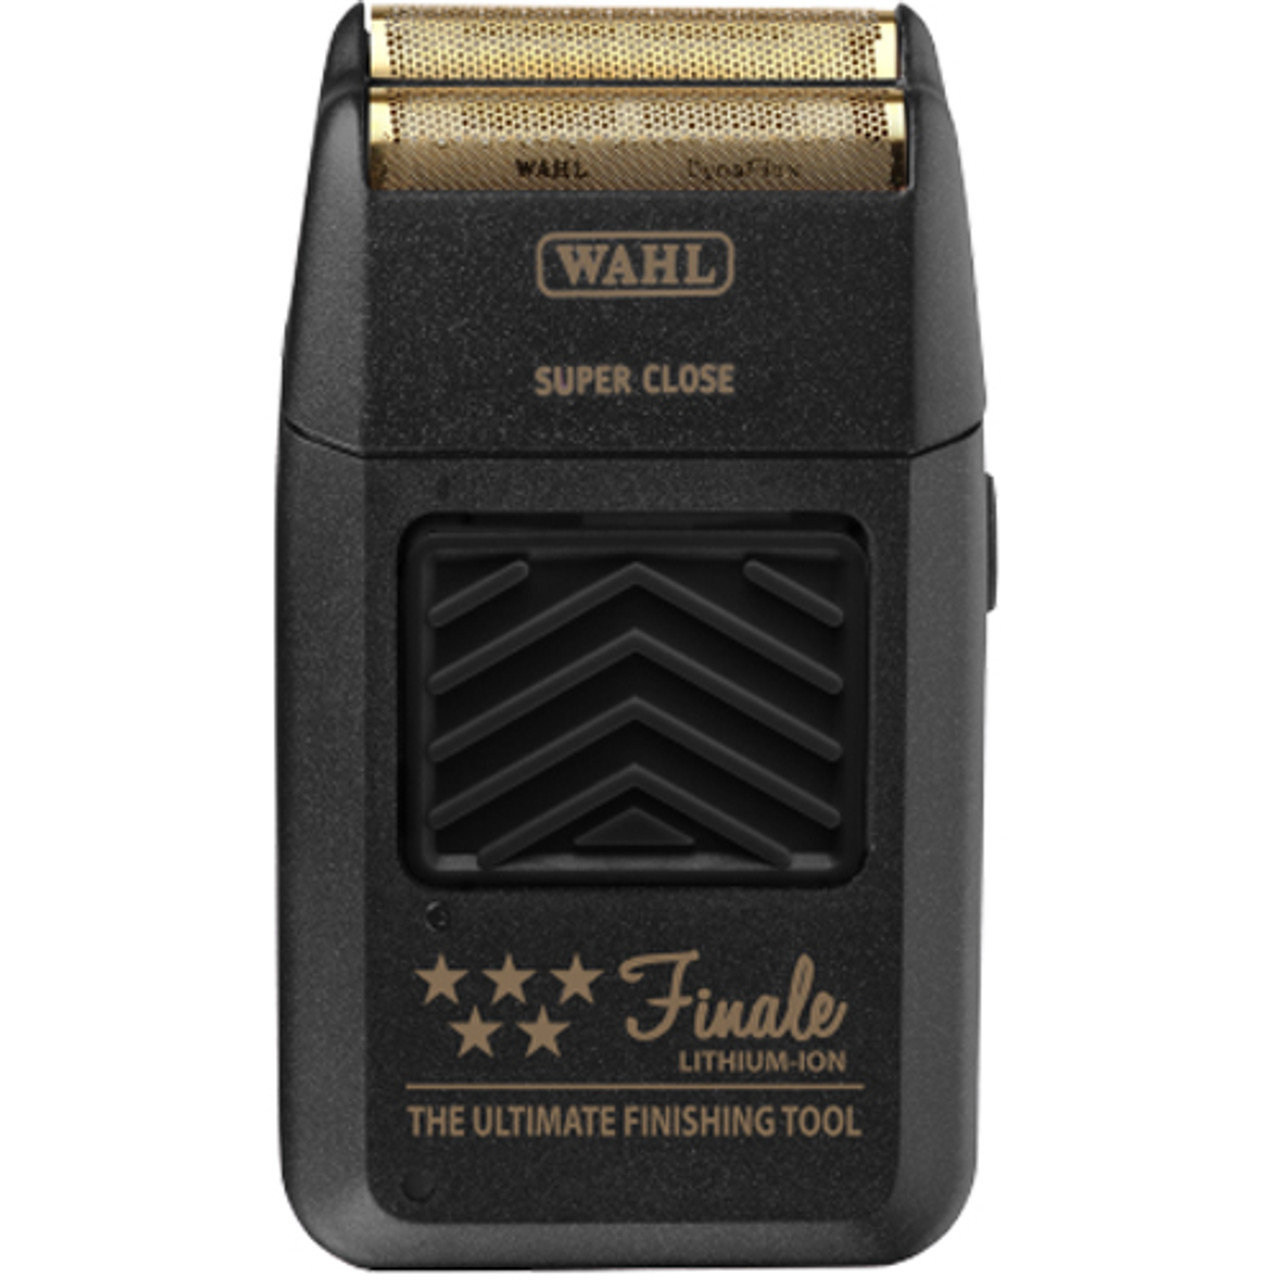 Wahl 5 Star Series Finale Shaver